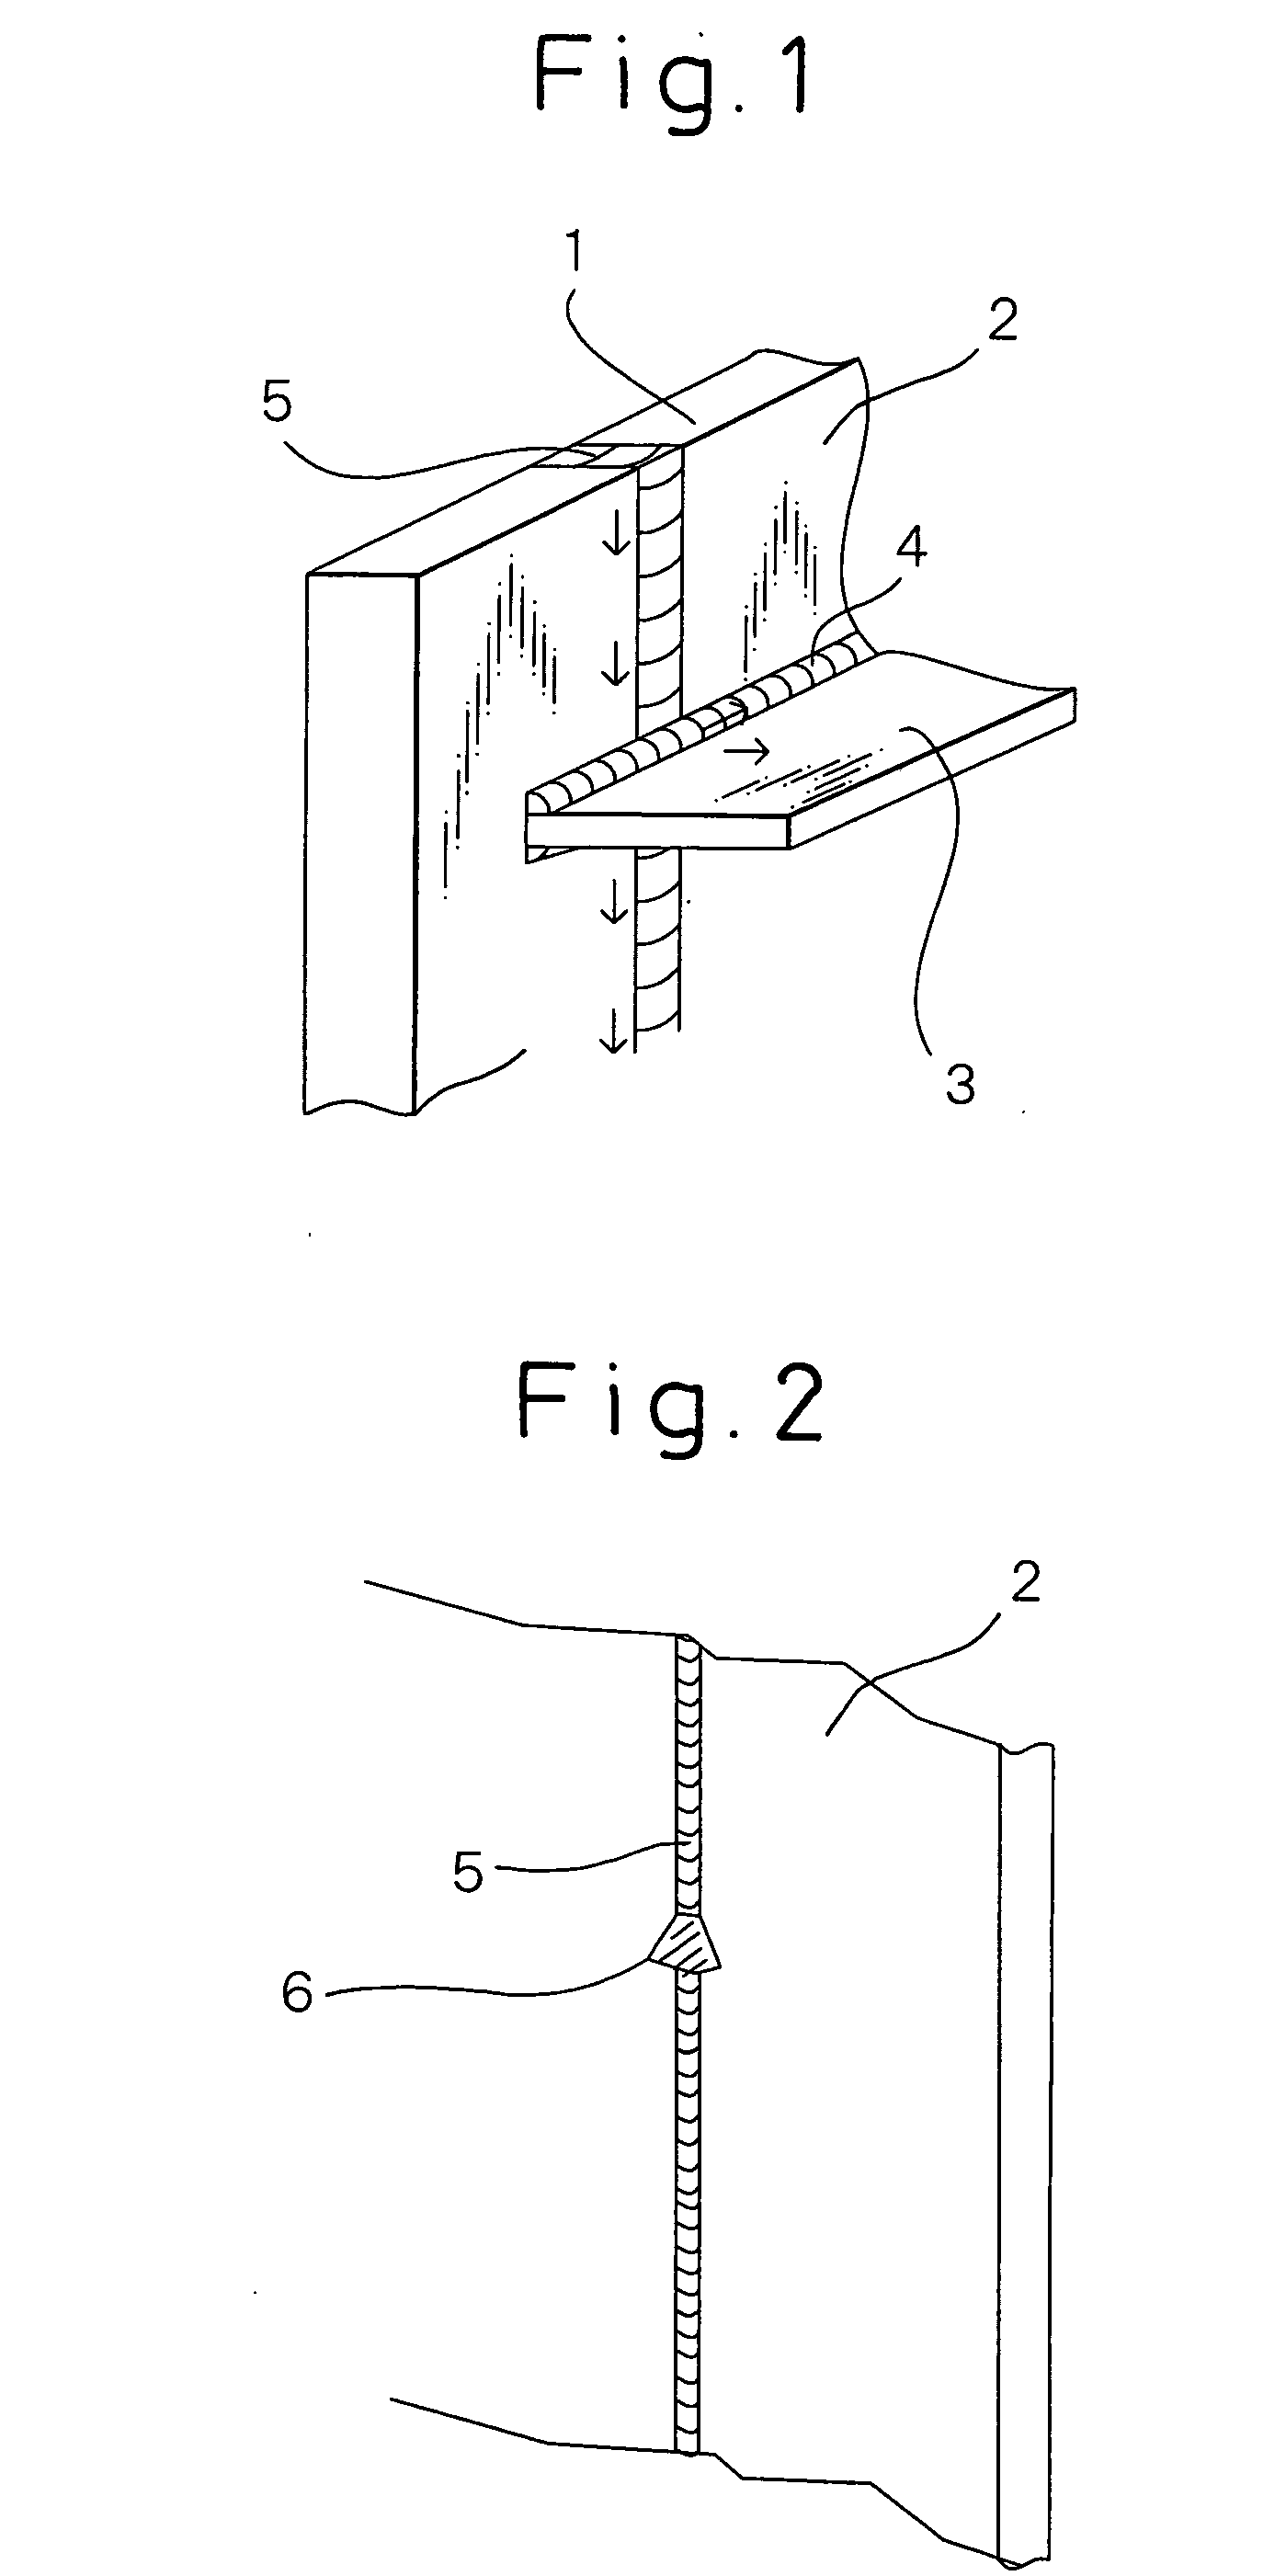 Weld structure having excellent resistance brittle crack propagation resistance and method of welding the weld structure